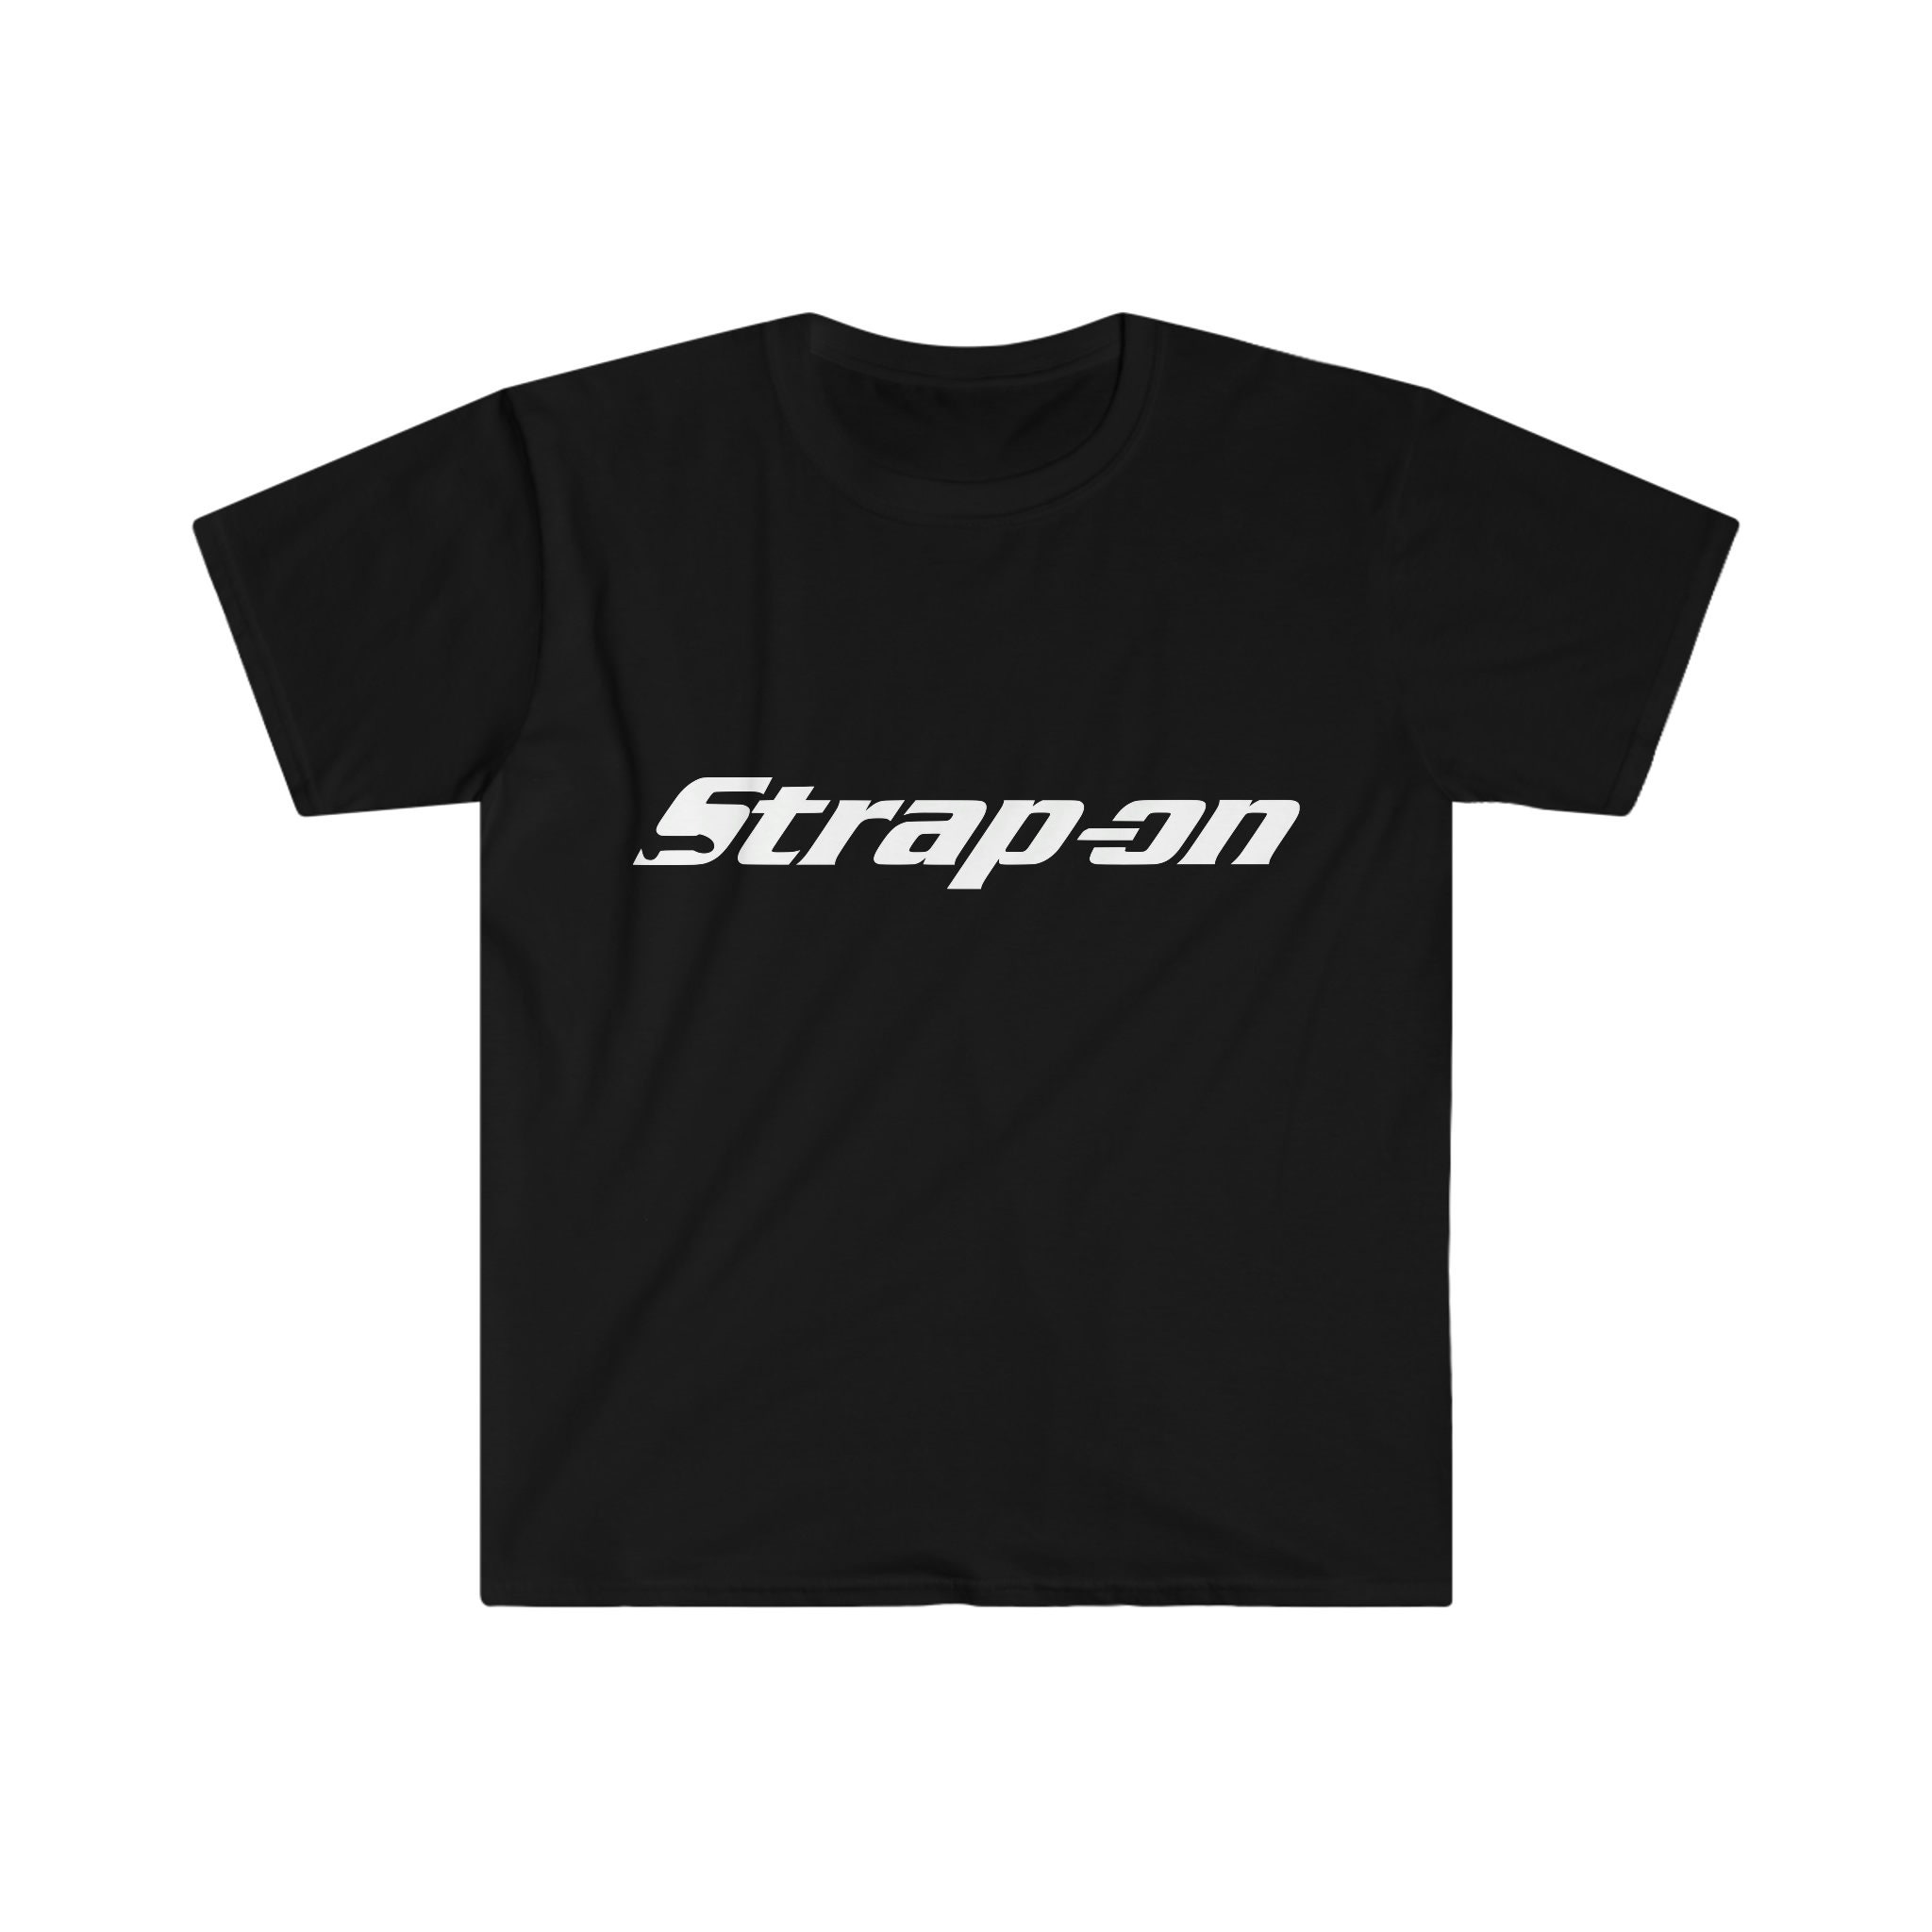 Snap-on Shirts for Men